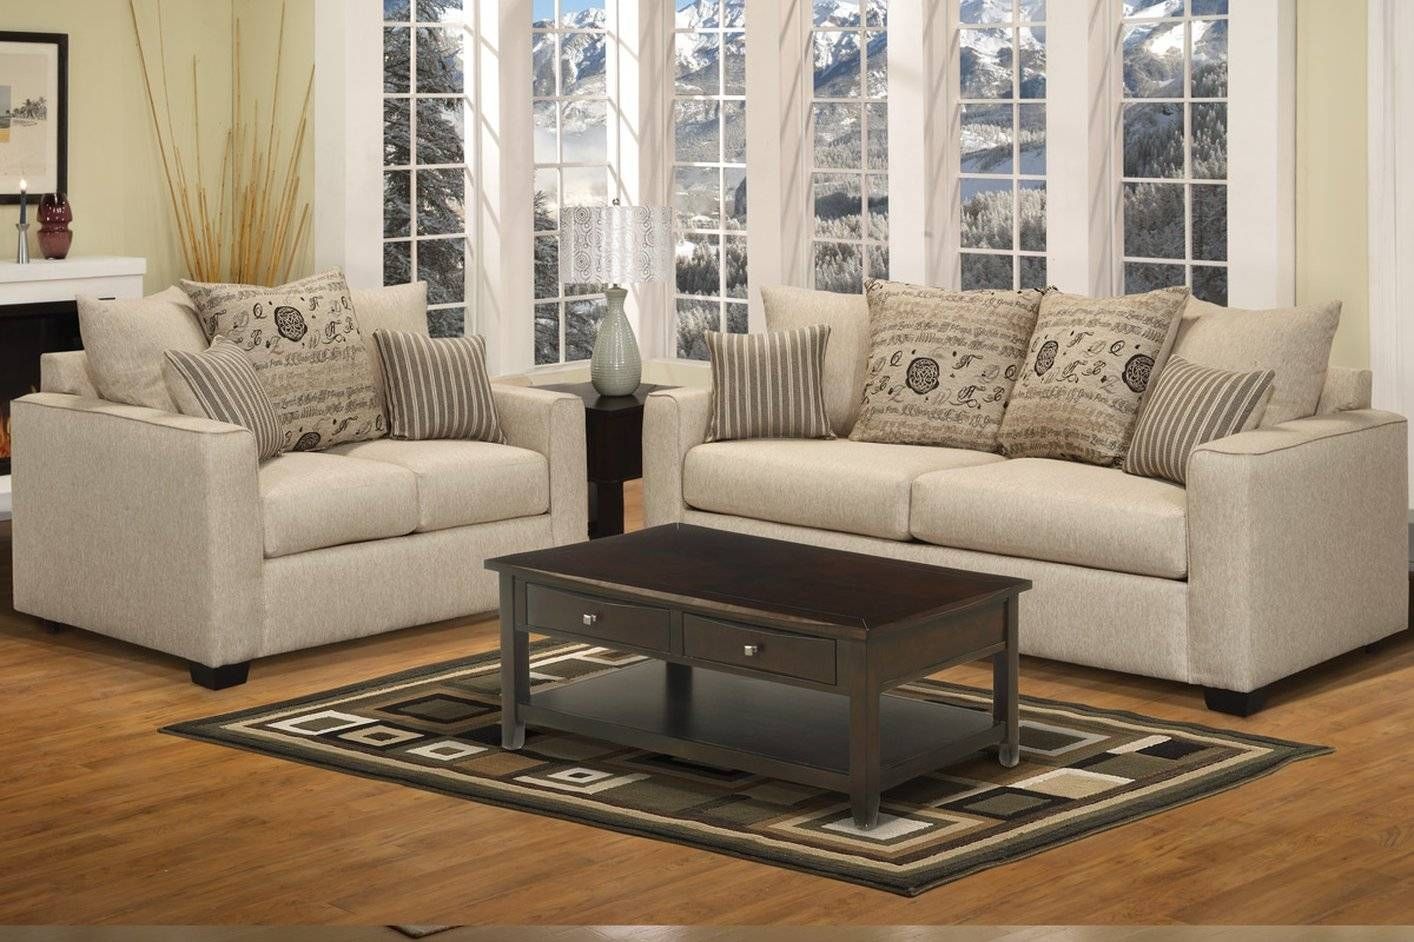 Sofa & Loveseat Set – Steal A Sofa Furniture Outlet Los Angeles Ca With Regard To Sofa Loveseat And Chairs (Photo 6 of 30)